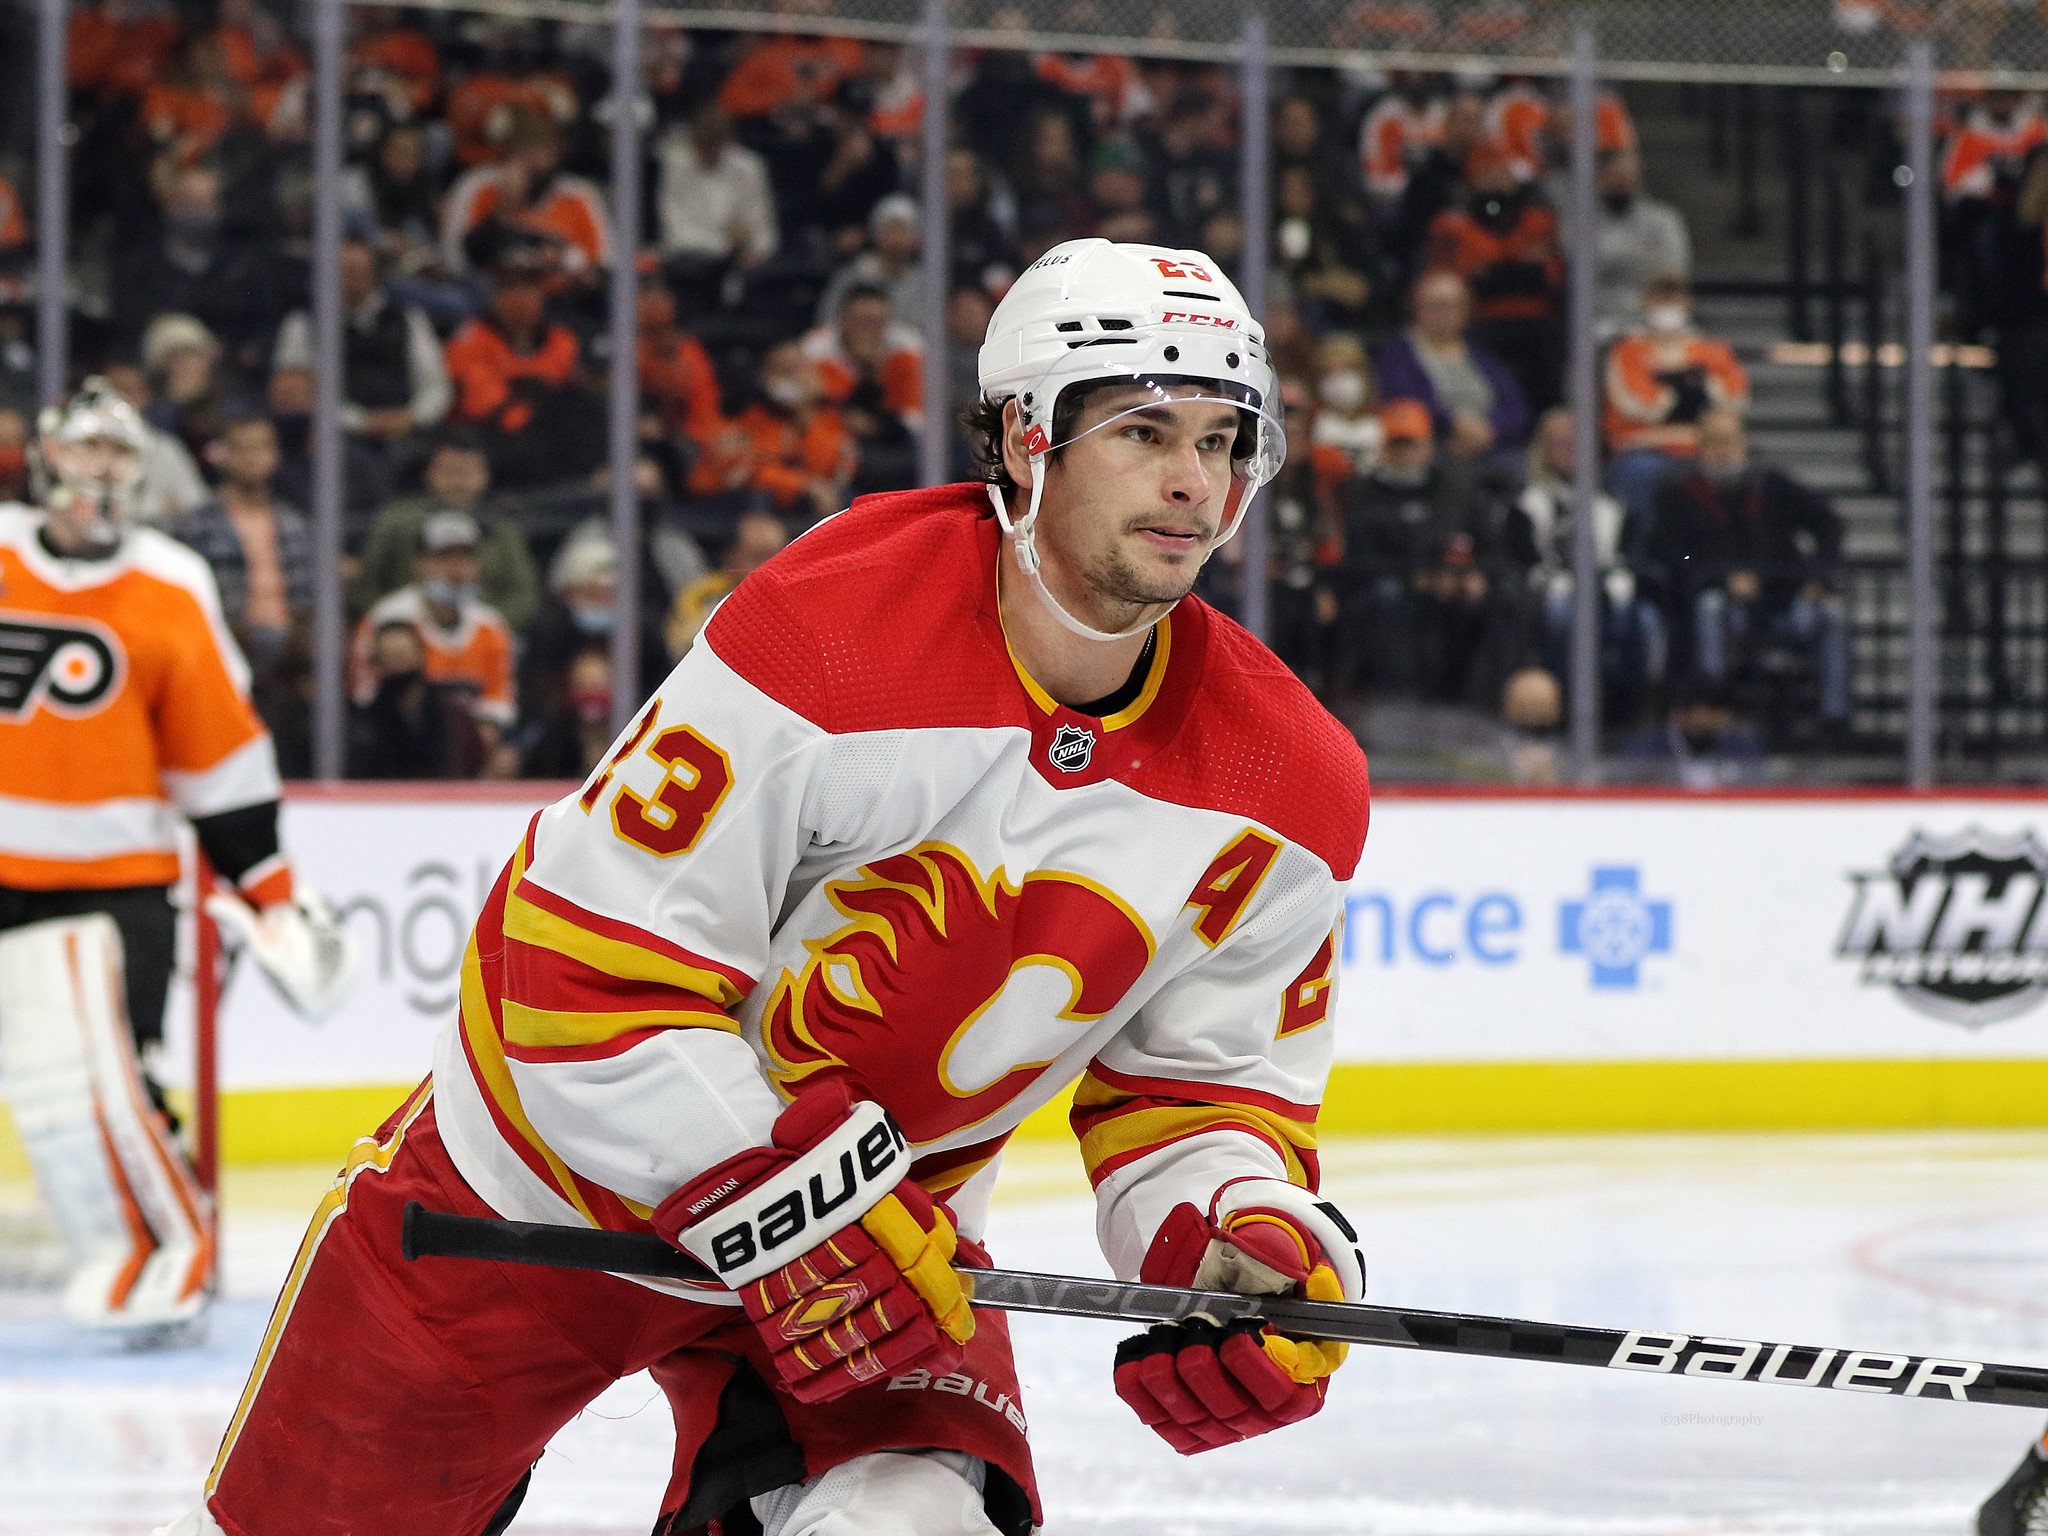 Flames' Monahan Speaks on Disappointing Start to 2021-22 Season